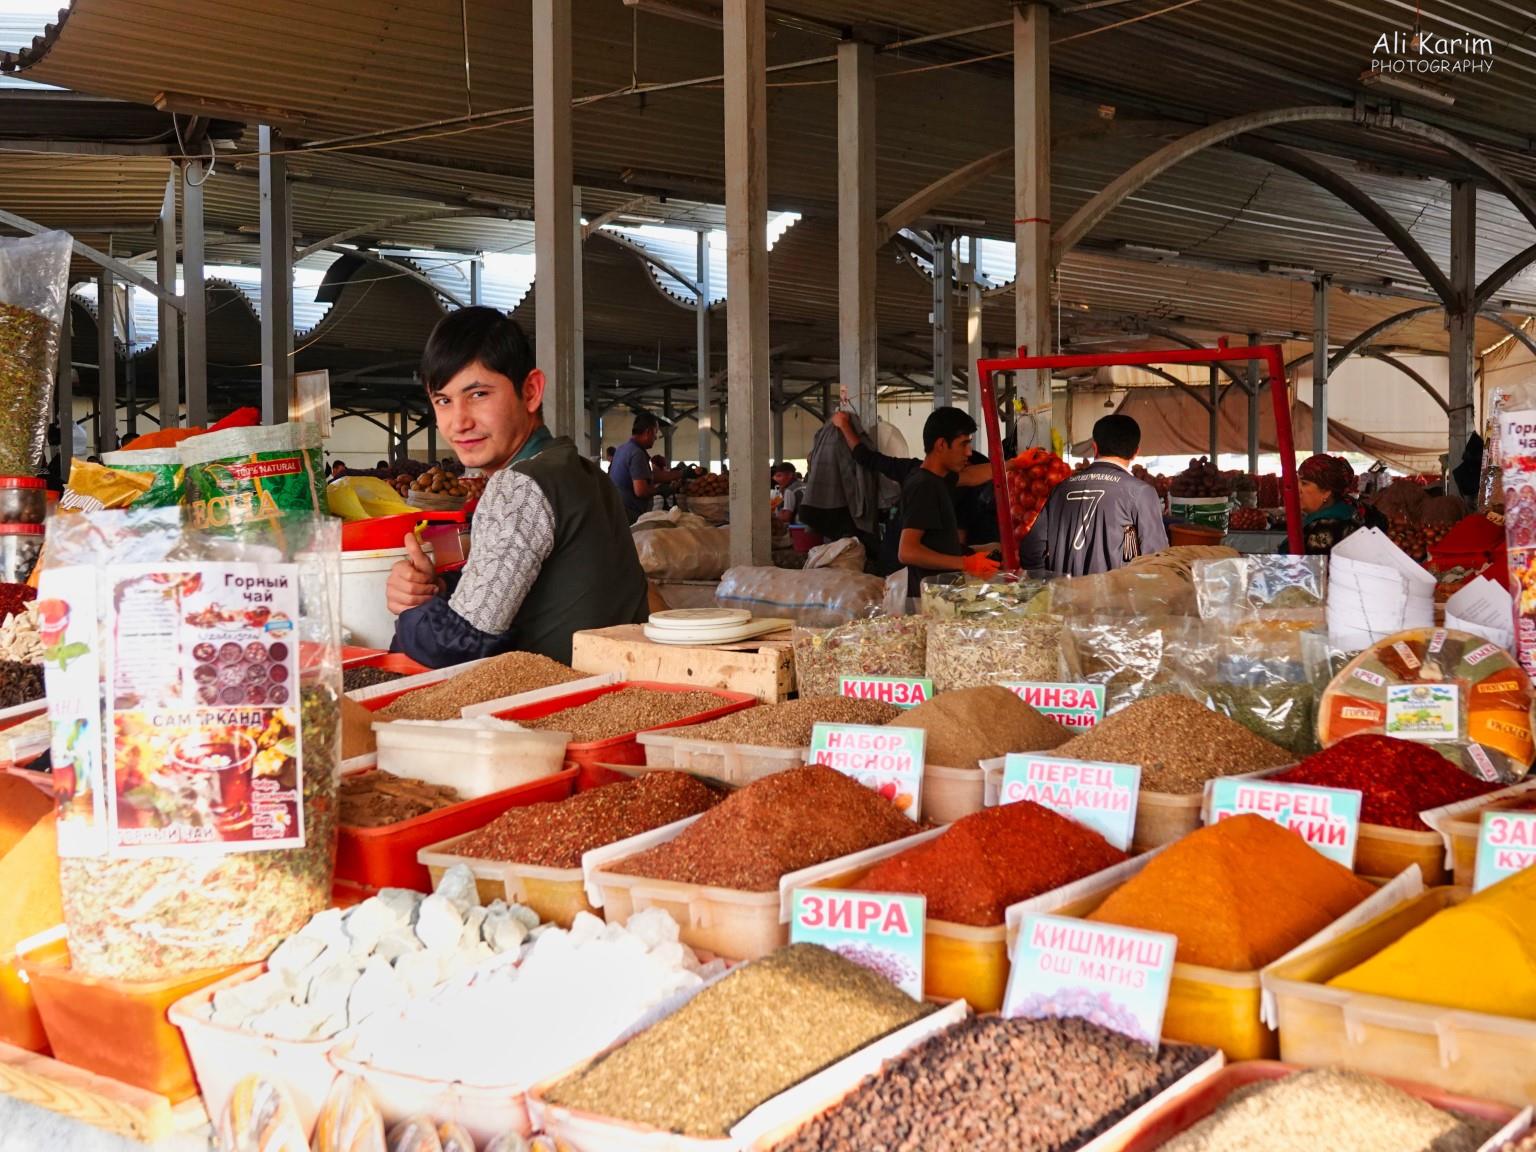 Tashkent, Oct 2019, Nuts and spices